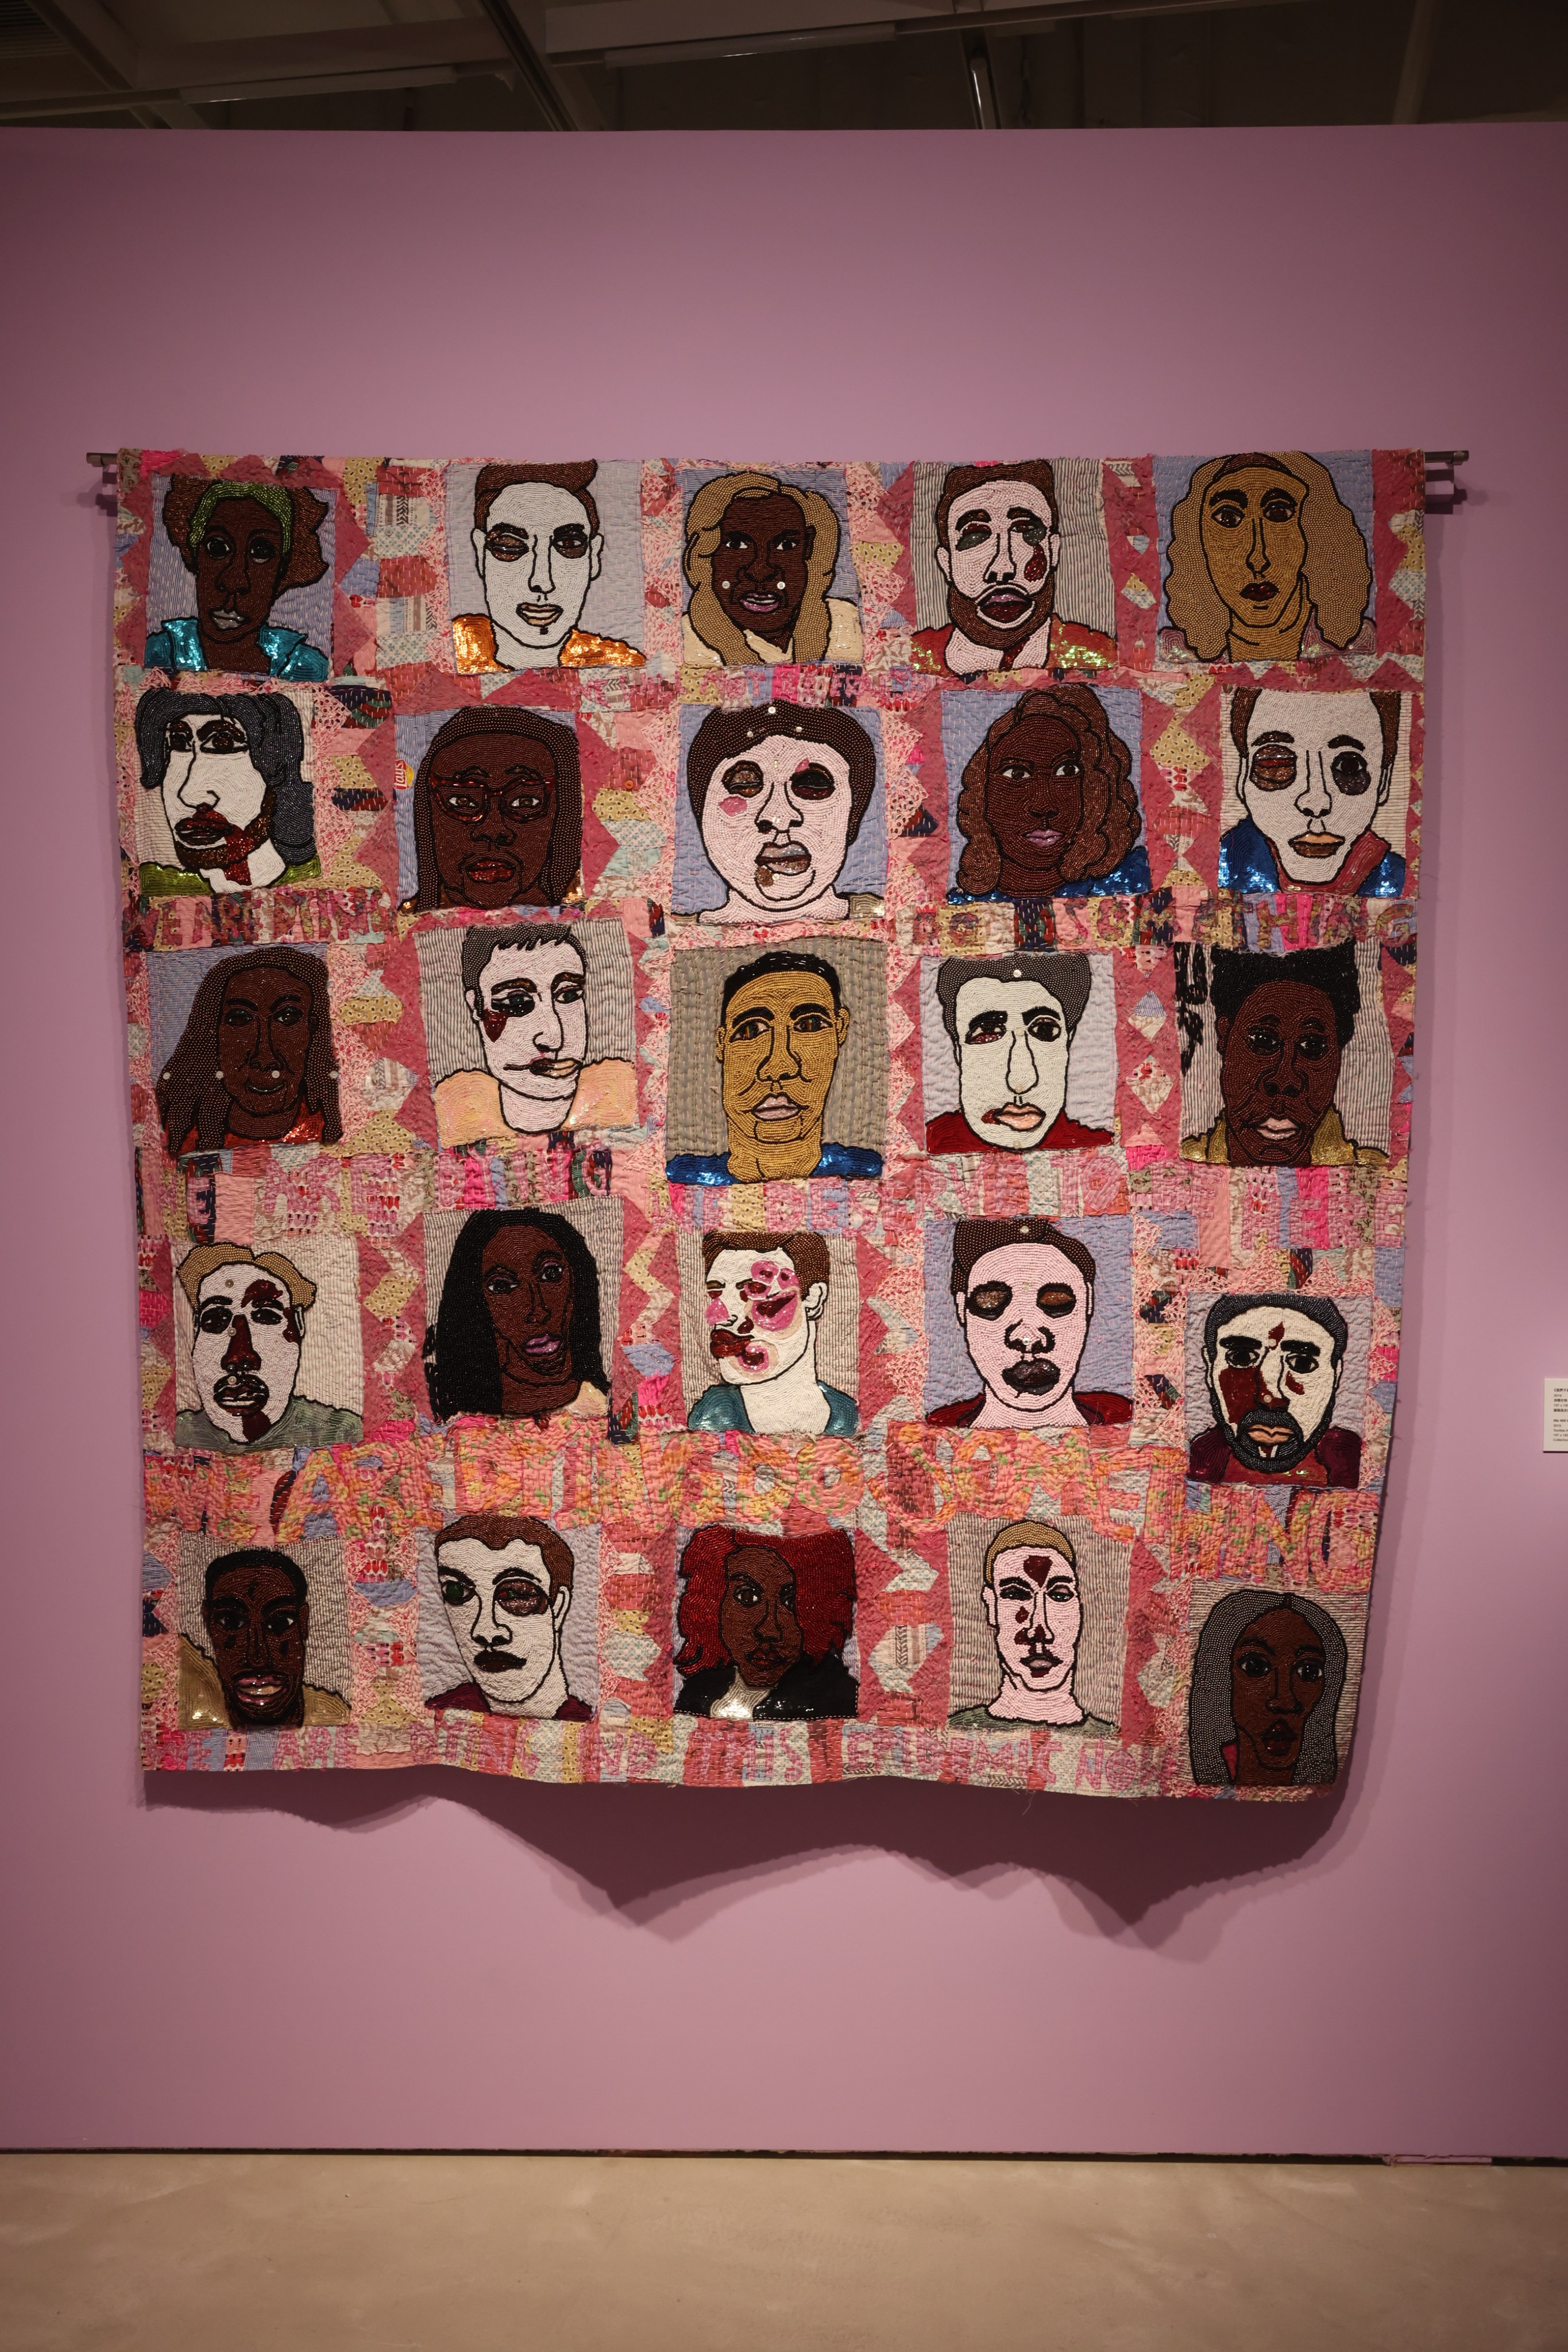 “We Will Not Be Erased”, a 2019 work by Thai artist Jakkai Siributr, on loan from the Sunpride Foundation, that depicts gay activist victims of homophobic violence. It is part of Jakkai’s retrospective on show at Chat in Tsuen Wan, Hong Kong. Photo: courtesy Chat